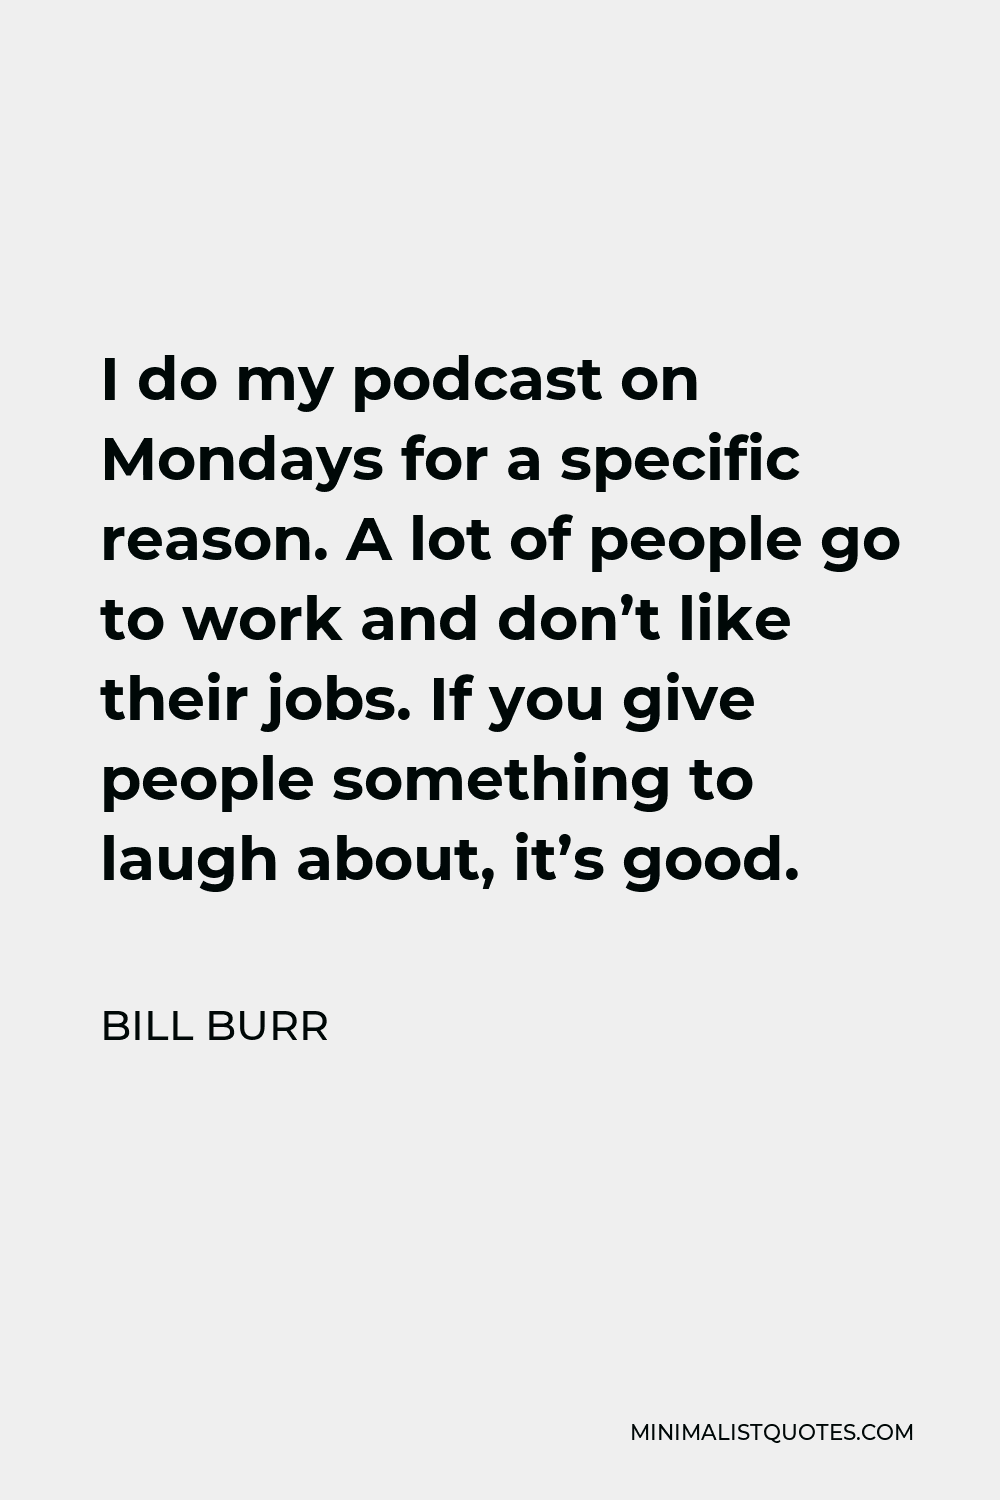 Bill Burr Quote - I do my podcast on Mondays for a specific reason. A lot of people go to work and don’t like their jobs. If you give people something to laugh about, it’s good.